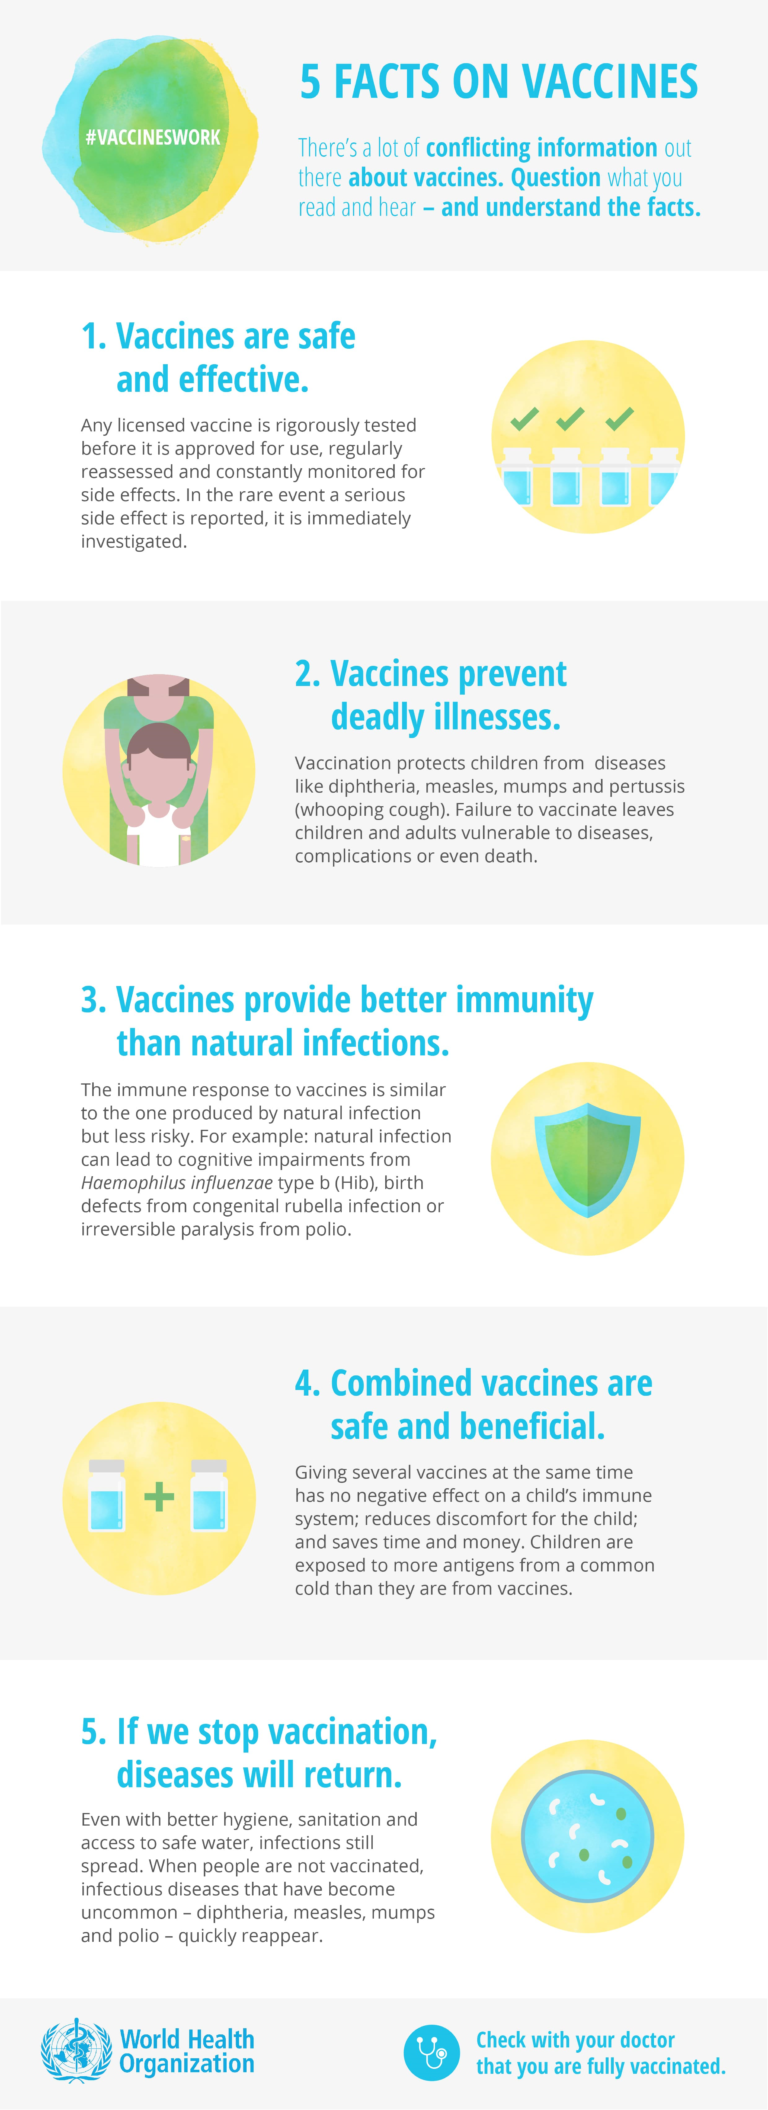 vaccine facts image from the WHO. 1- vaccines are safe and effective. 2-Vaccines prevent deadly illness. 3-Vaccines provide better immunity than natural infections. 4-Combined vaccines are safe and beneficial. 5-If we stop vaccinations, diseases will return